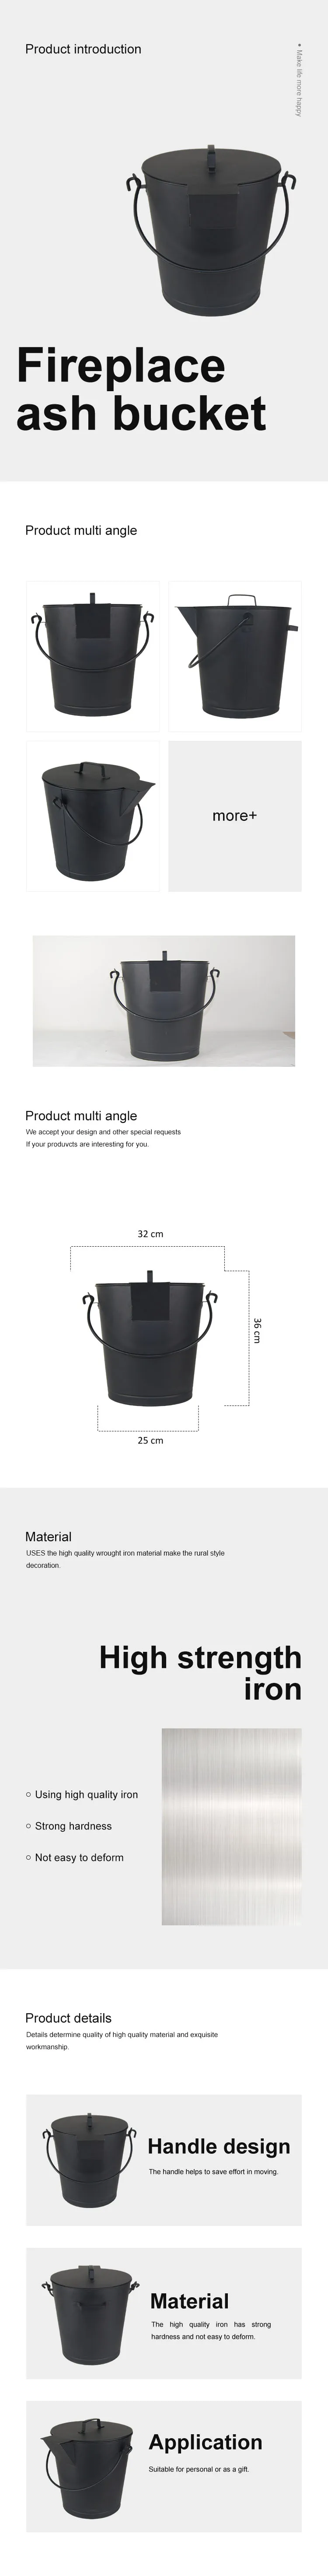 5.15 Gallon Ash Bucket with Lid and Shovel galvanized metal coal hod Coal and Hot Ash Pail for Fireplace